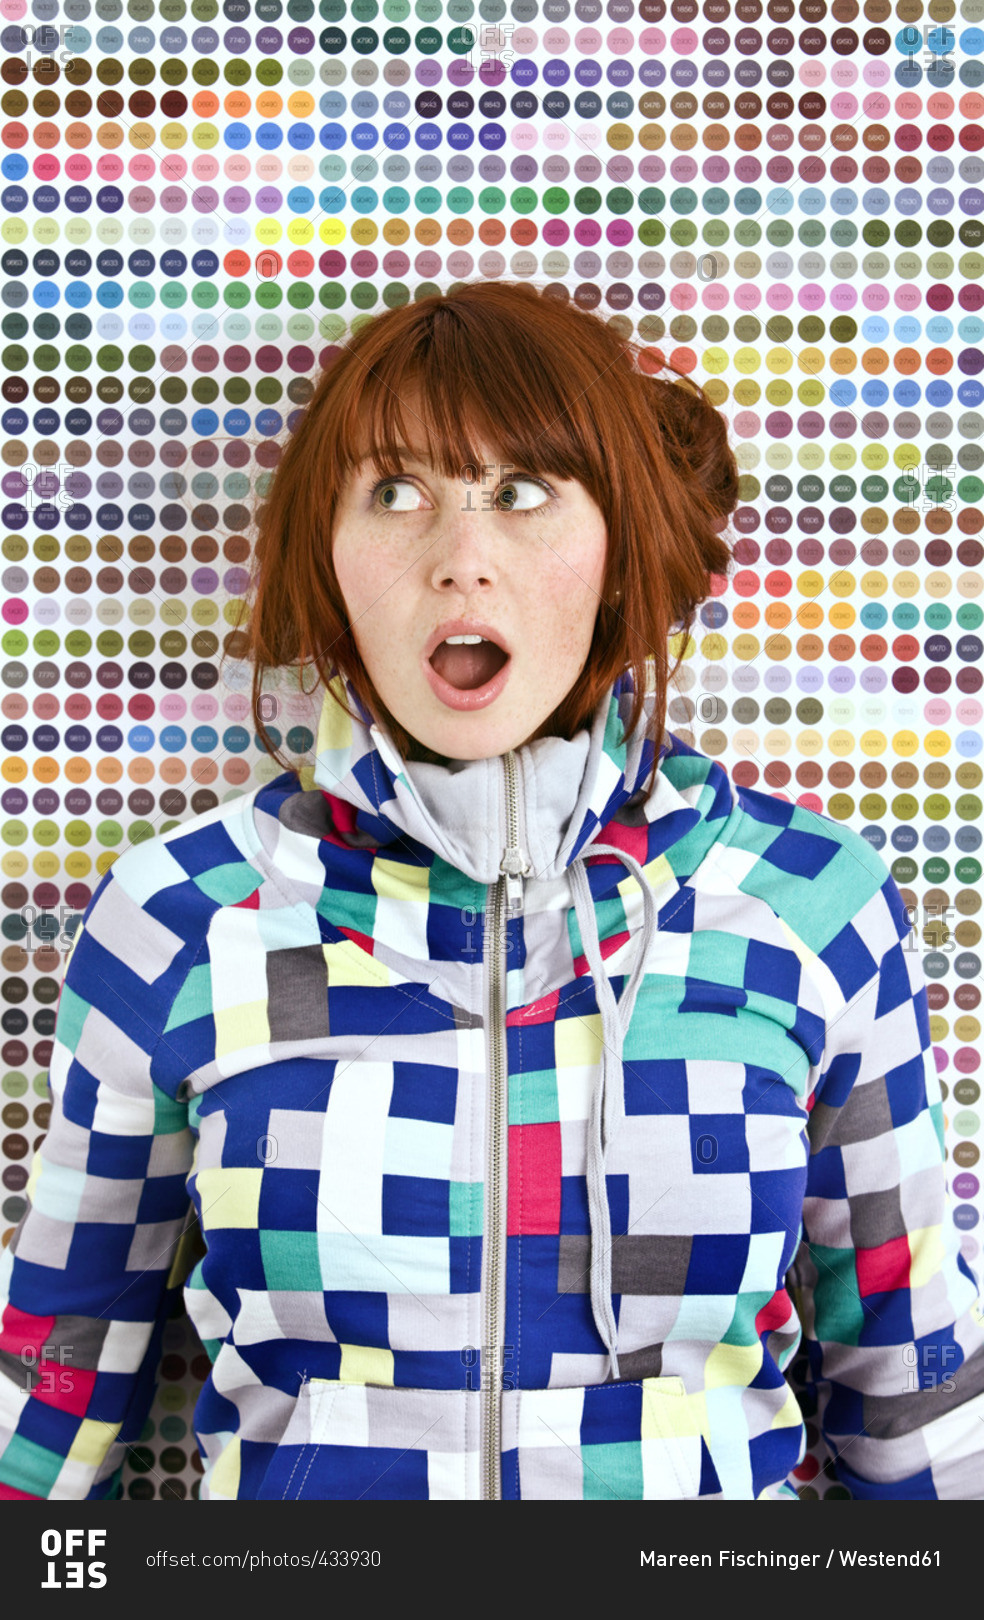 Young woman wearing patterned jacket in front of dotted wall